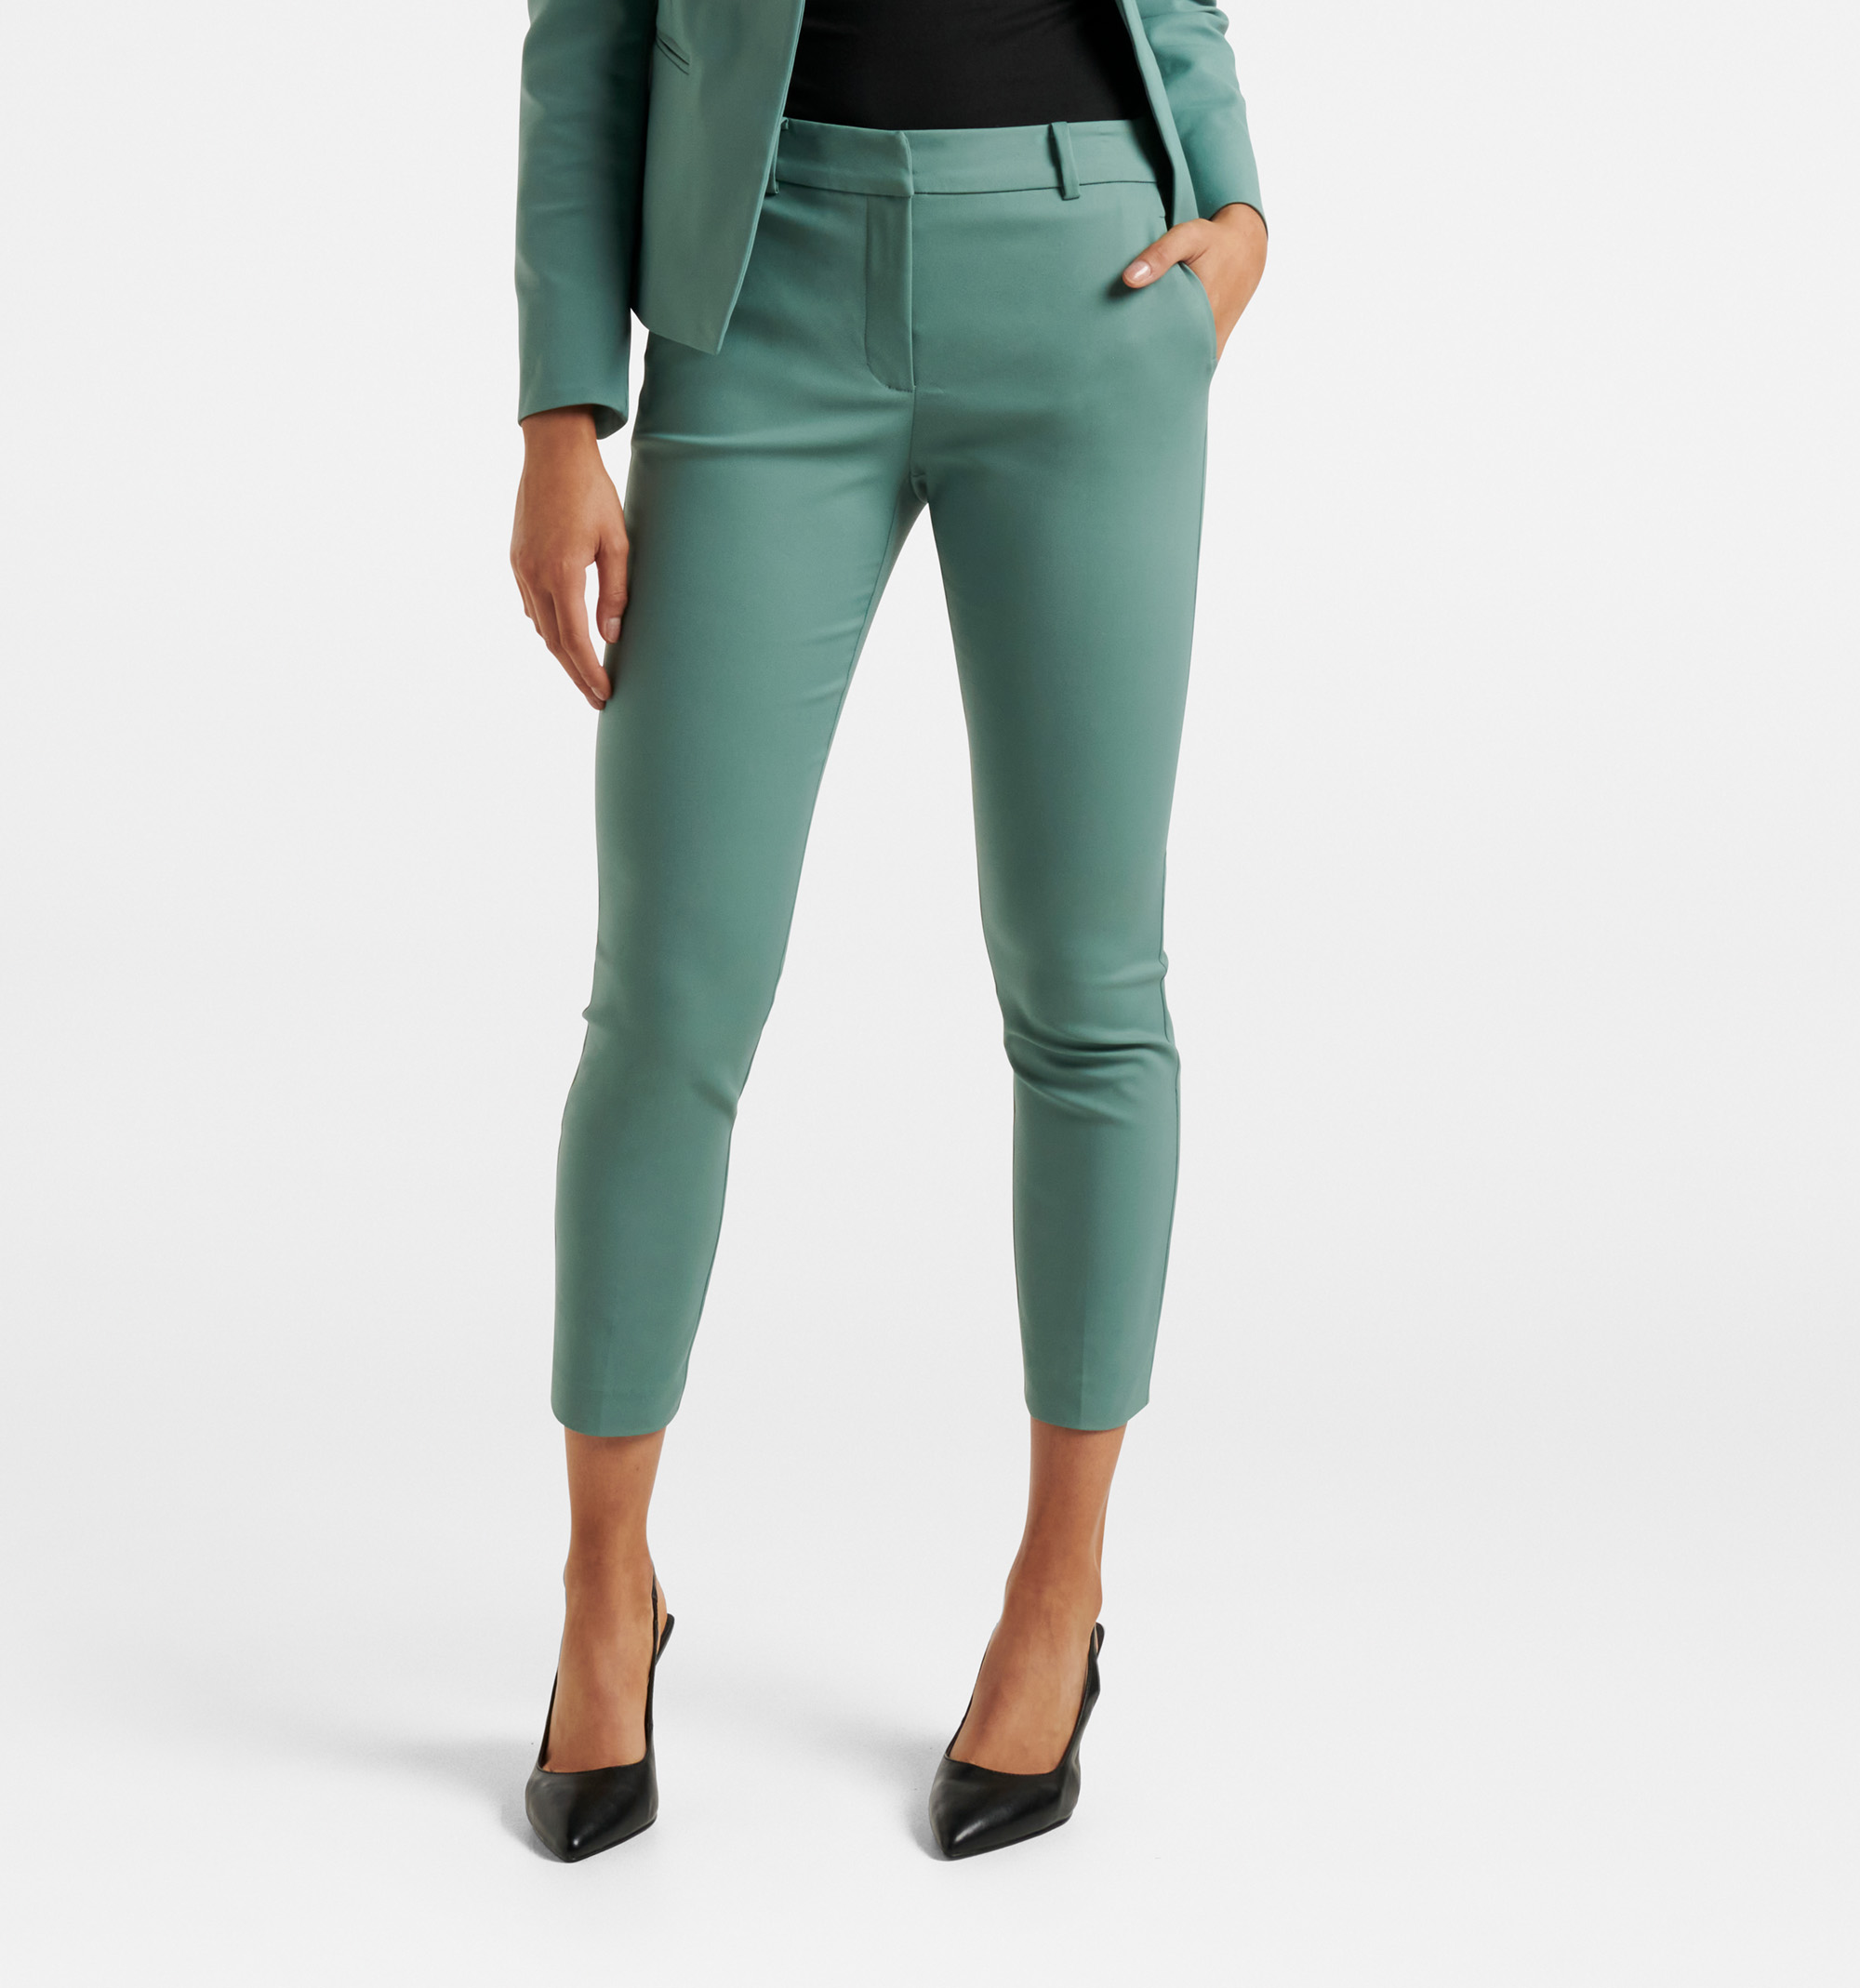 Buy FAB QUEENS Women's Cotton Flex Straight Casual Trouser Pant for Women  Slim Fit Pants for Kurtis Bottom Wear Bottle Green at Amazon.in